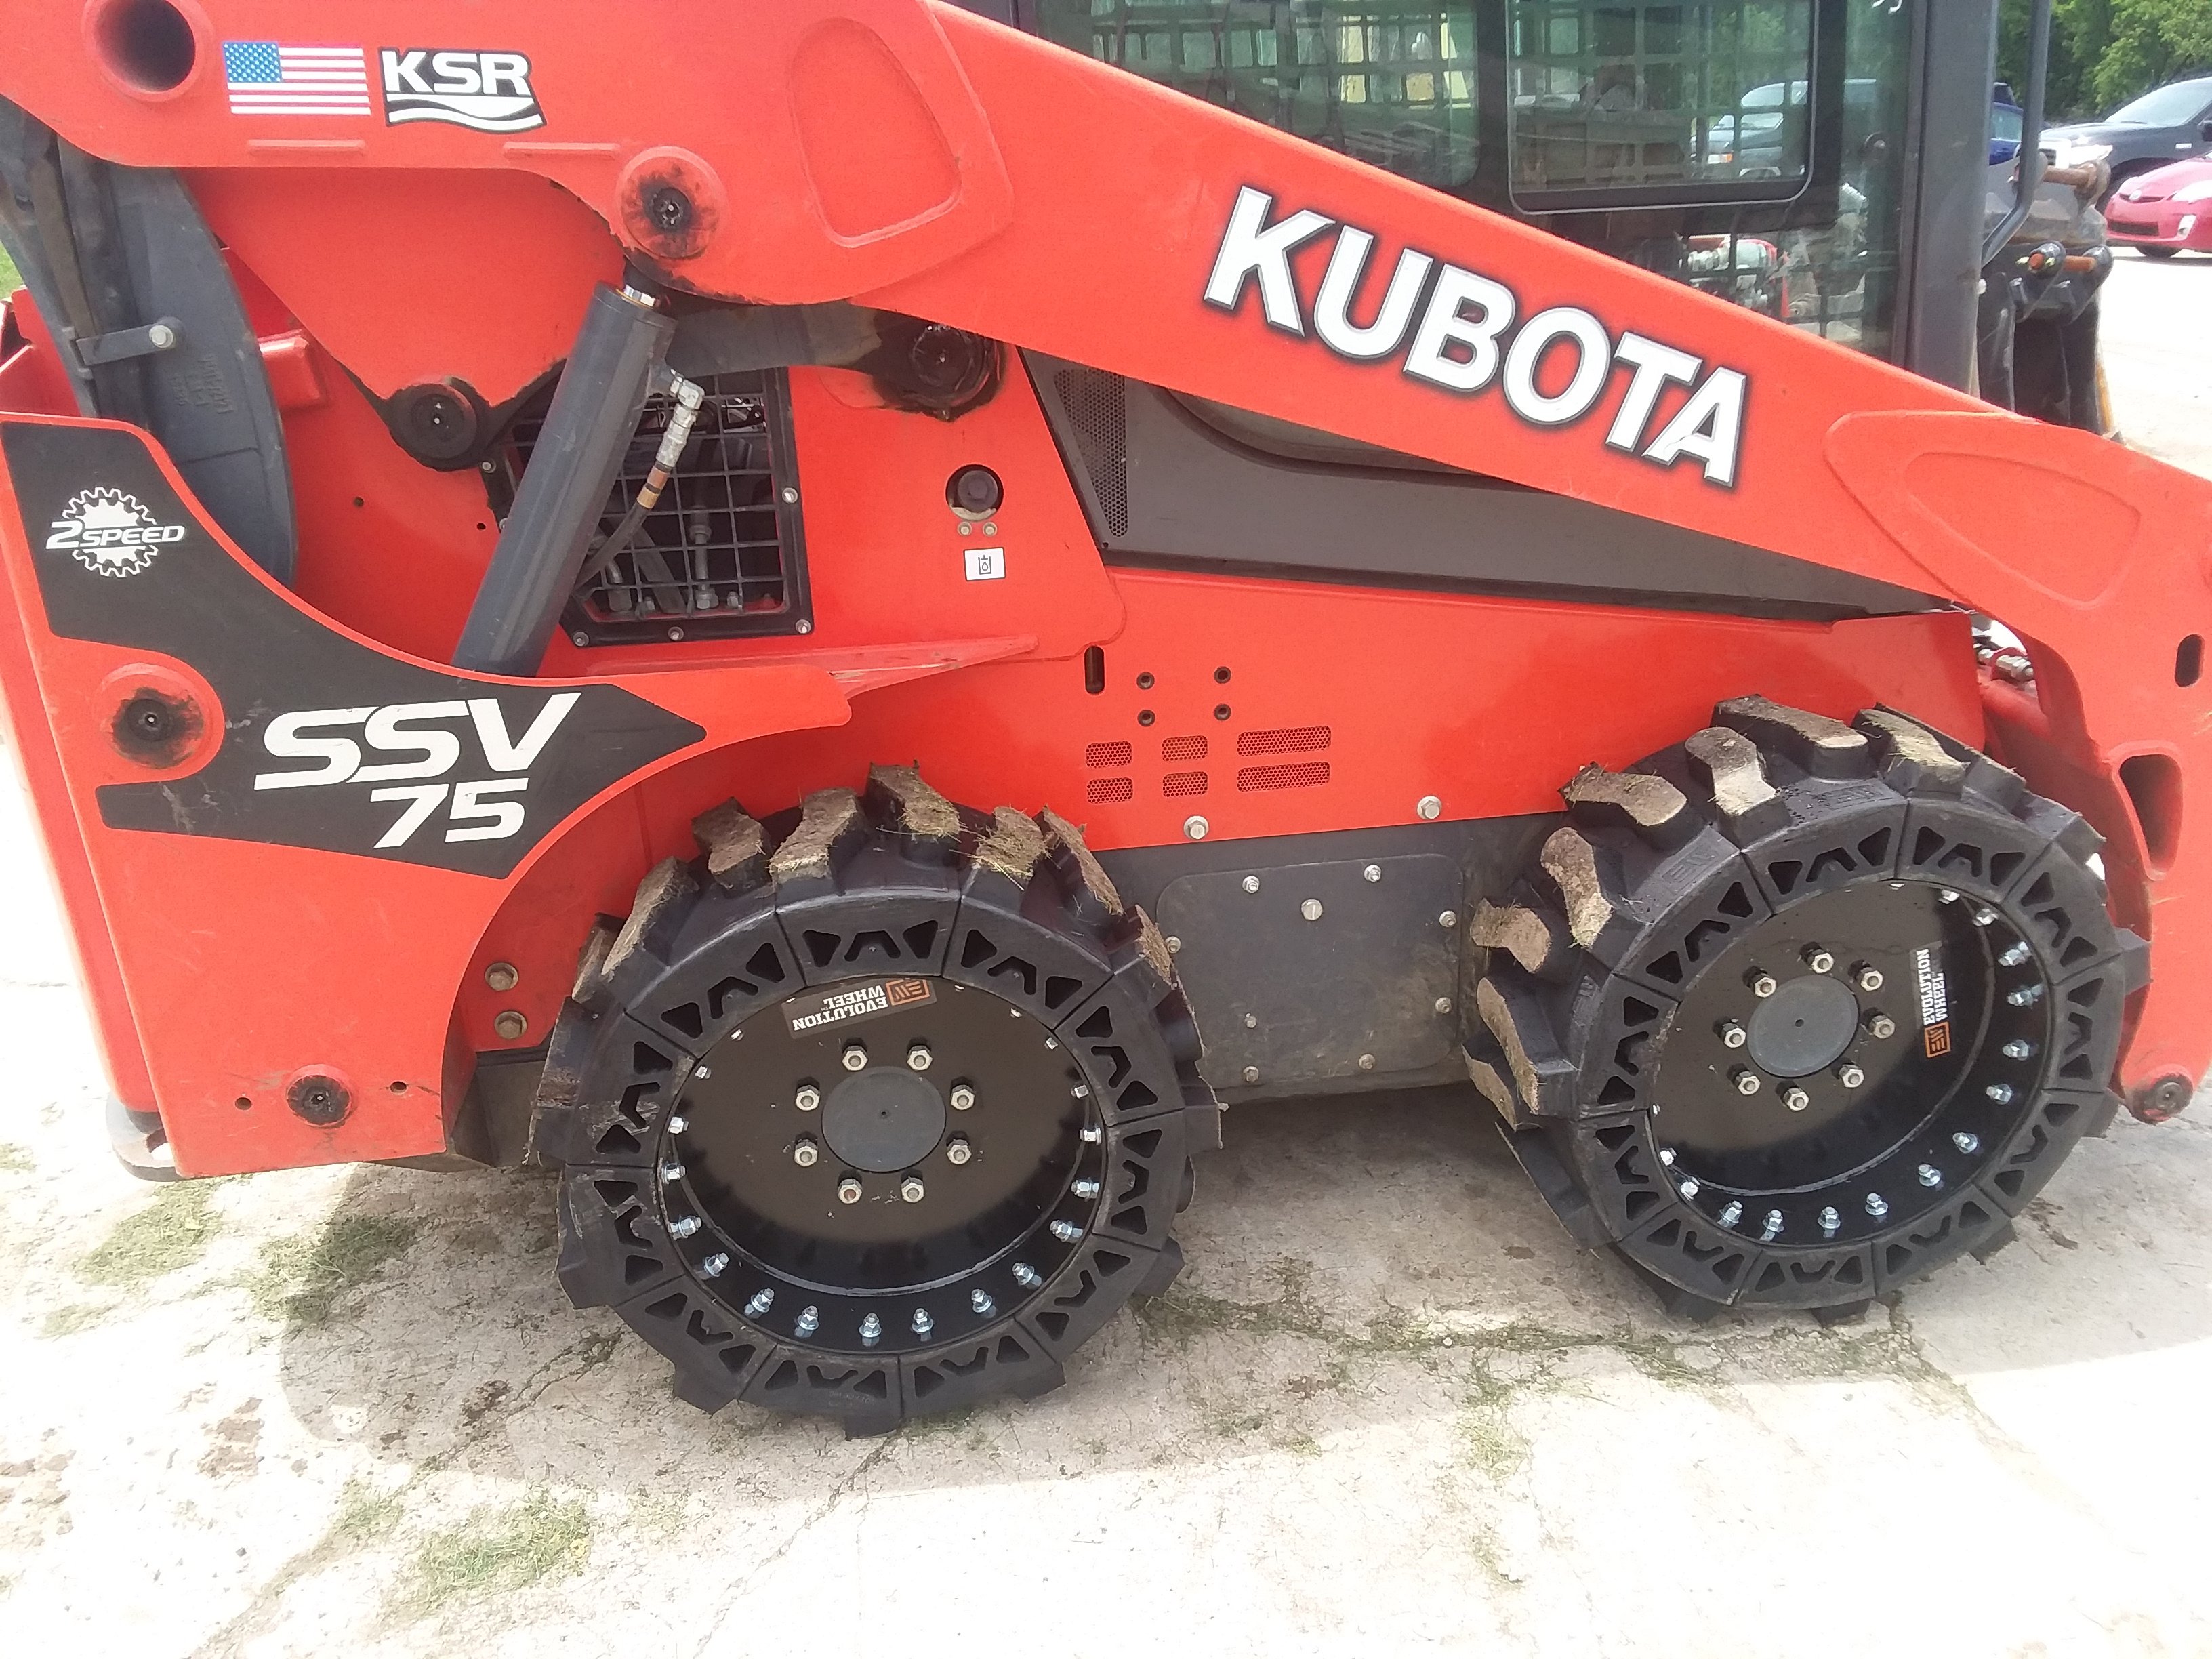 This images shows a red Kubota skid steer using our traction skid steer tires